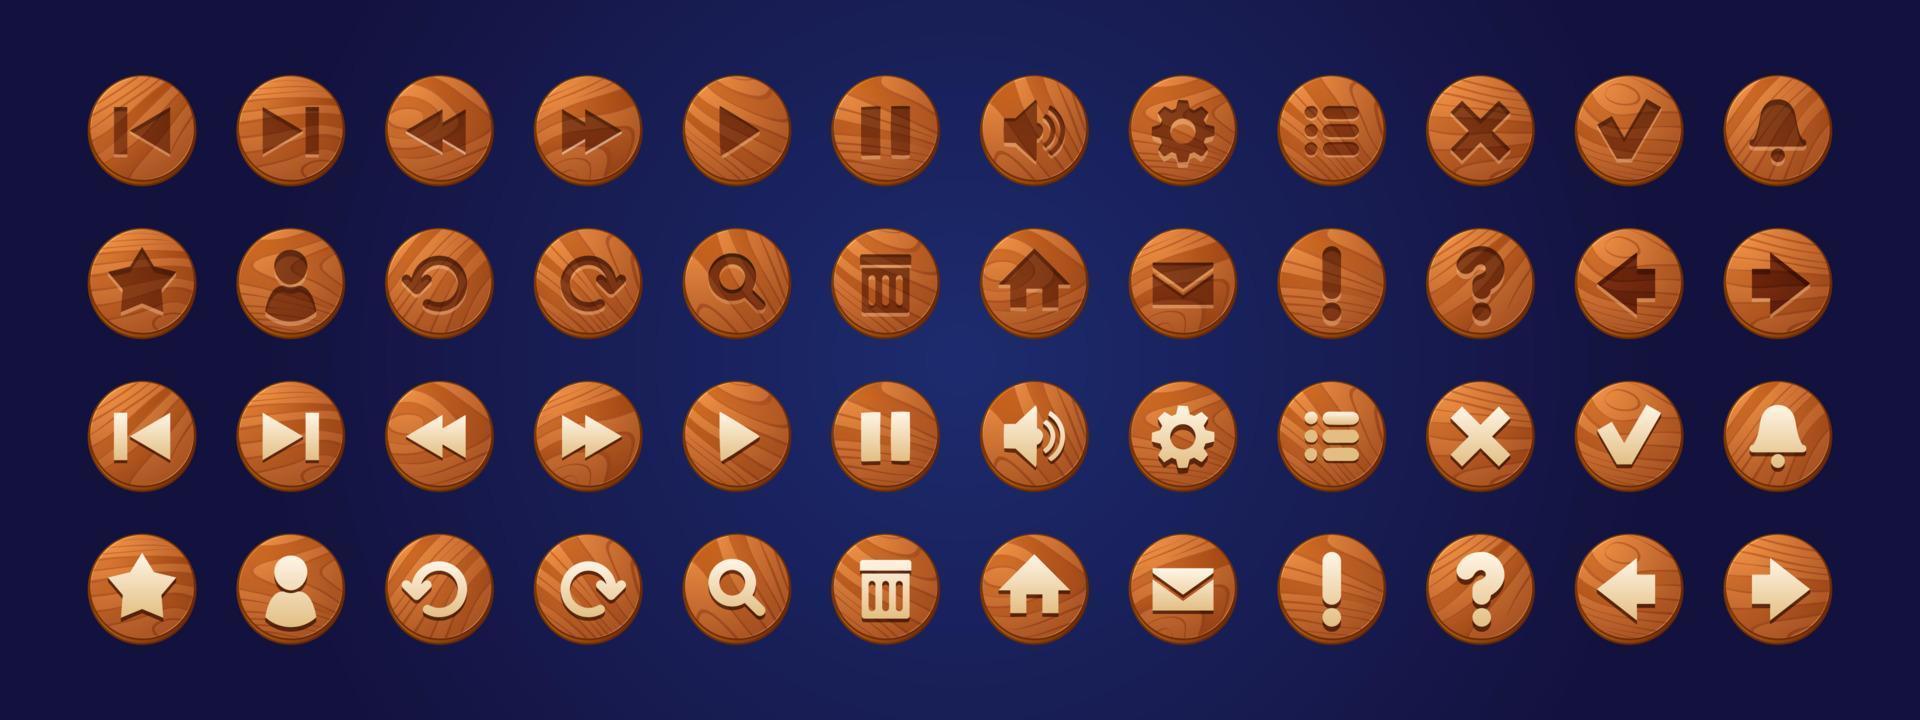 Wooden web buttons, round icons for game interface vector